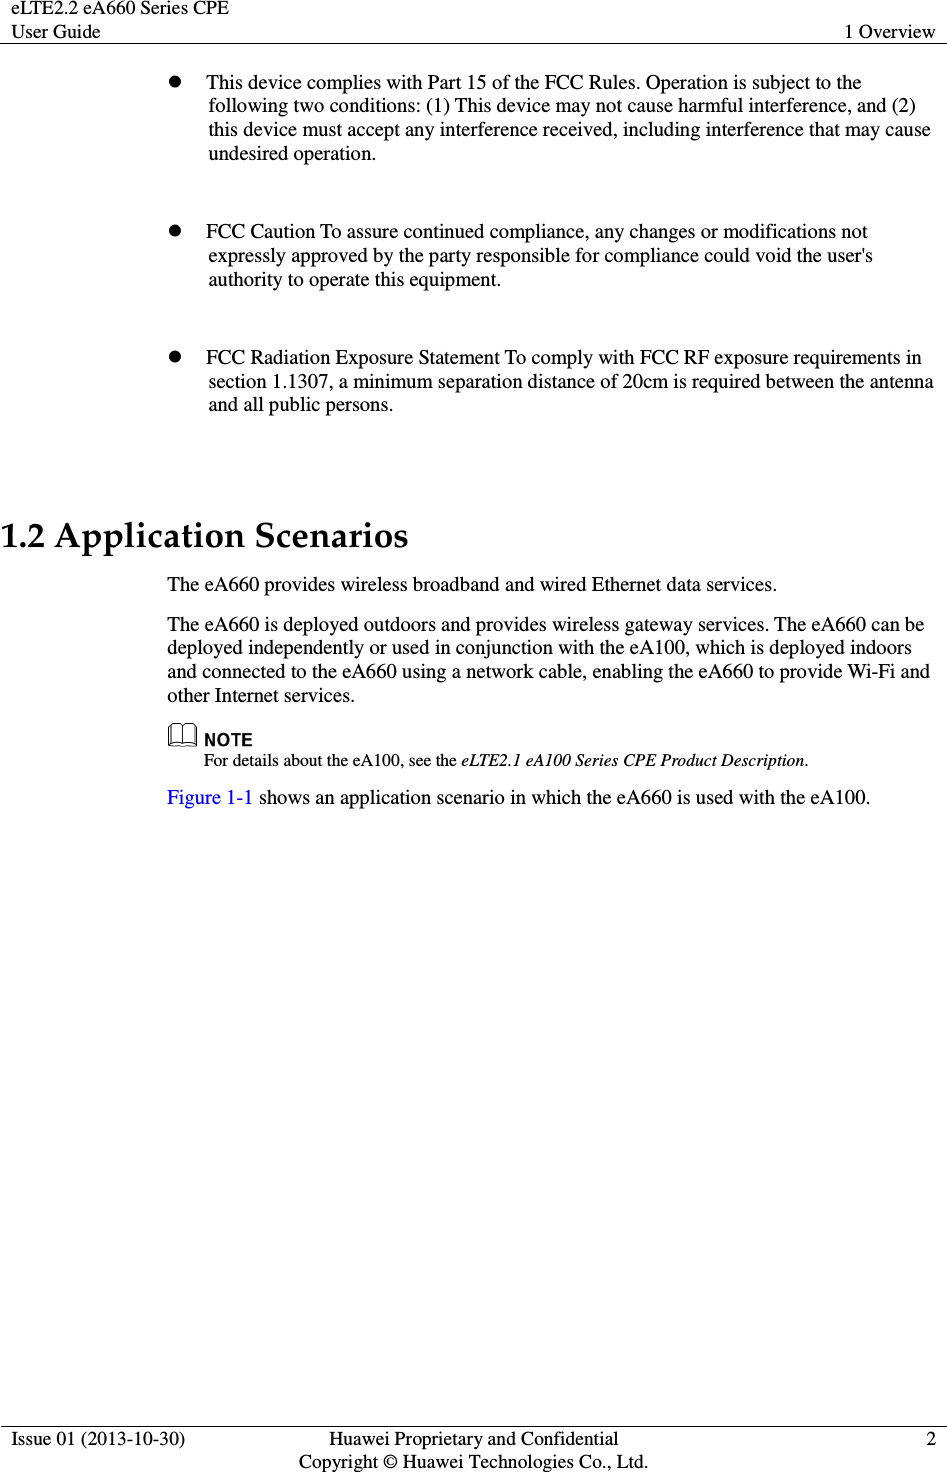 eLTE2.2 eA660 Series CPE User Guide  1 Overview  Issue 01 (2013-10-30)  Huawei Proprietary and Confidential                                     Copyright © Huawei Technologies Co., Ltd. 2   This device complies with Part 15 of the FCC Rules. Operation is subject to the following two conditions: (1) This device may not cause harmful interference, and (2) this device must accept any interference received, including interference that may cause undesired operation.     FCC Caution To assure continued compliance, any changes or modifications not expressly approved by the party responsible for compliance could void the user&apos;s authority to operate this equipment.   FCC Radiation Exposure Statement To comply with FCC RF exposure requirements in section 1.1307, a minimum separation distance of 20cm is required between the antenna and all public persons.  1.2 Application Scenarios The eA660 provides wireless broadband and wired Ethernet data services. The eA660 is deployed outdoors and provides wireless gateway services. The eA660 can be deployed independently or used in conjunction with the eA100, which is deployed indoors and connected to the eA660 using a network cable, enabling the eA660 to provide Wi-Fi and other Internet services.    For details about the eA100, see the eLTE2.1 eA100 Series CPE Product Description. Figure 1-1 shows an application scenario in which the eA660 is used with the eA100. 